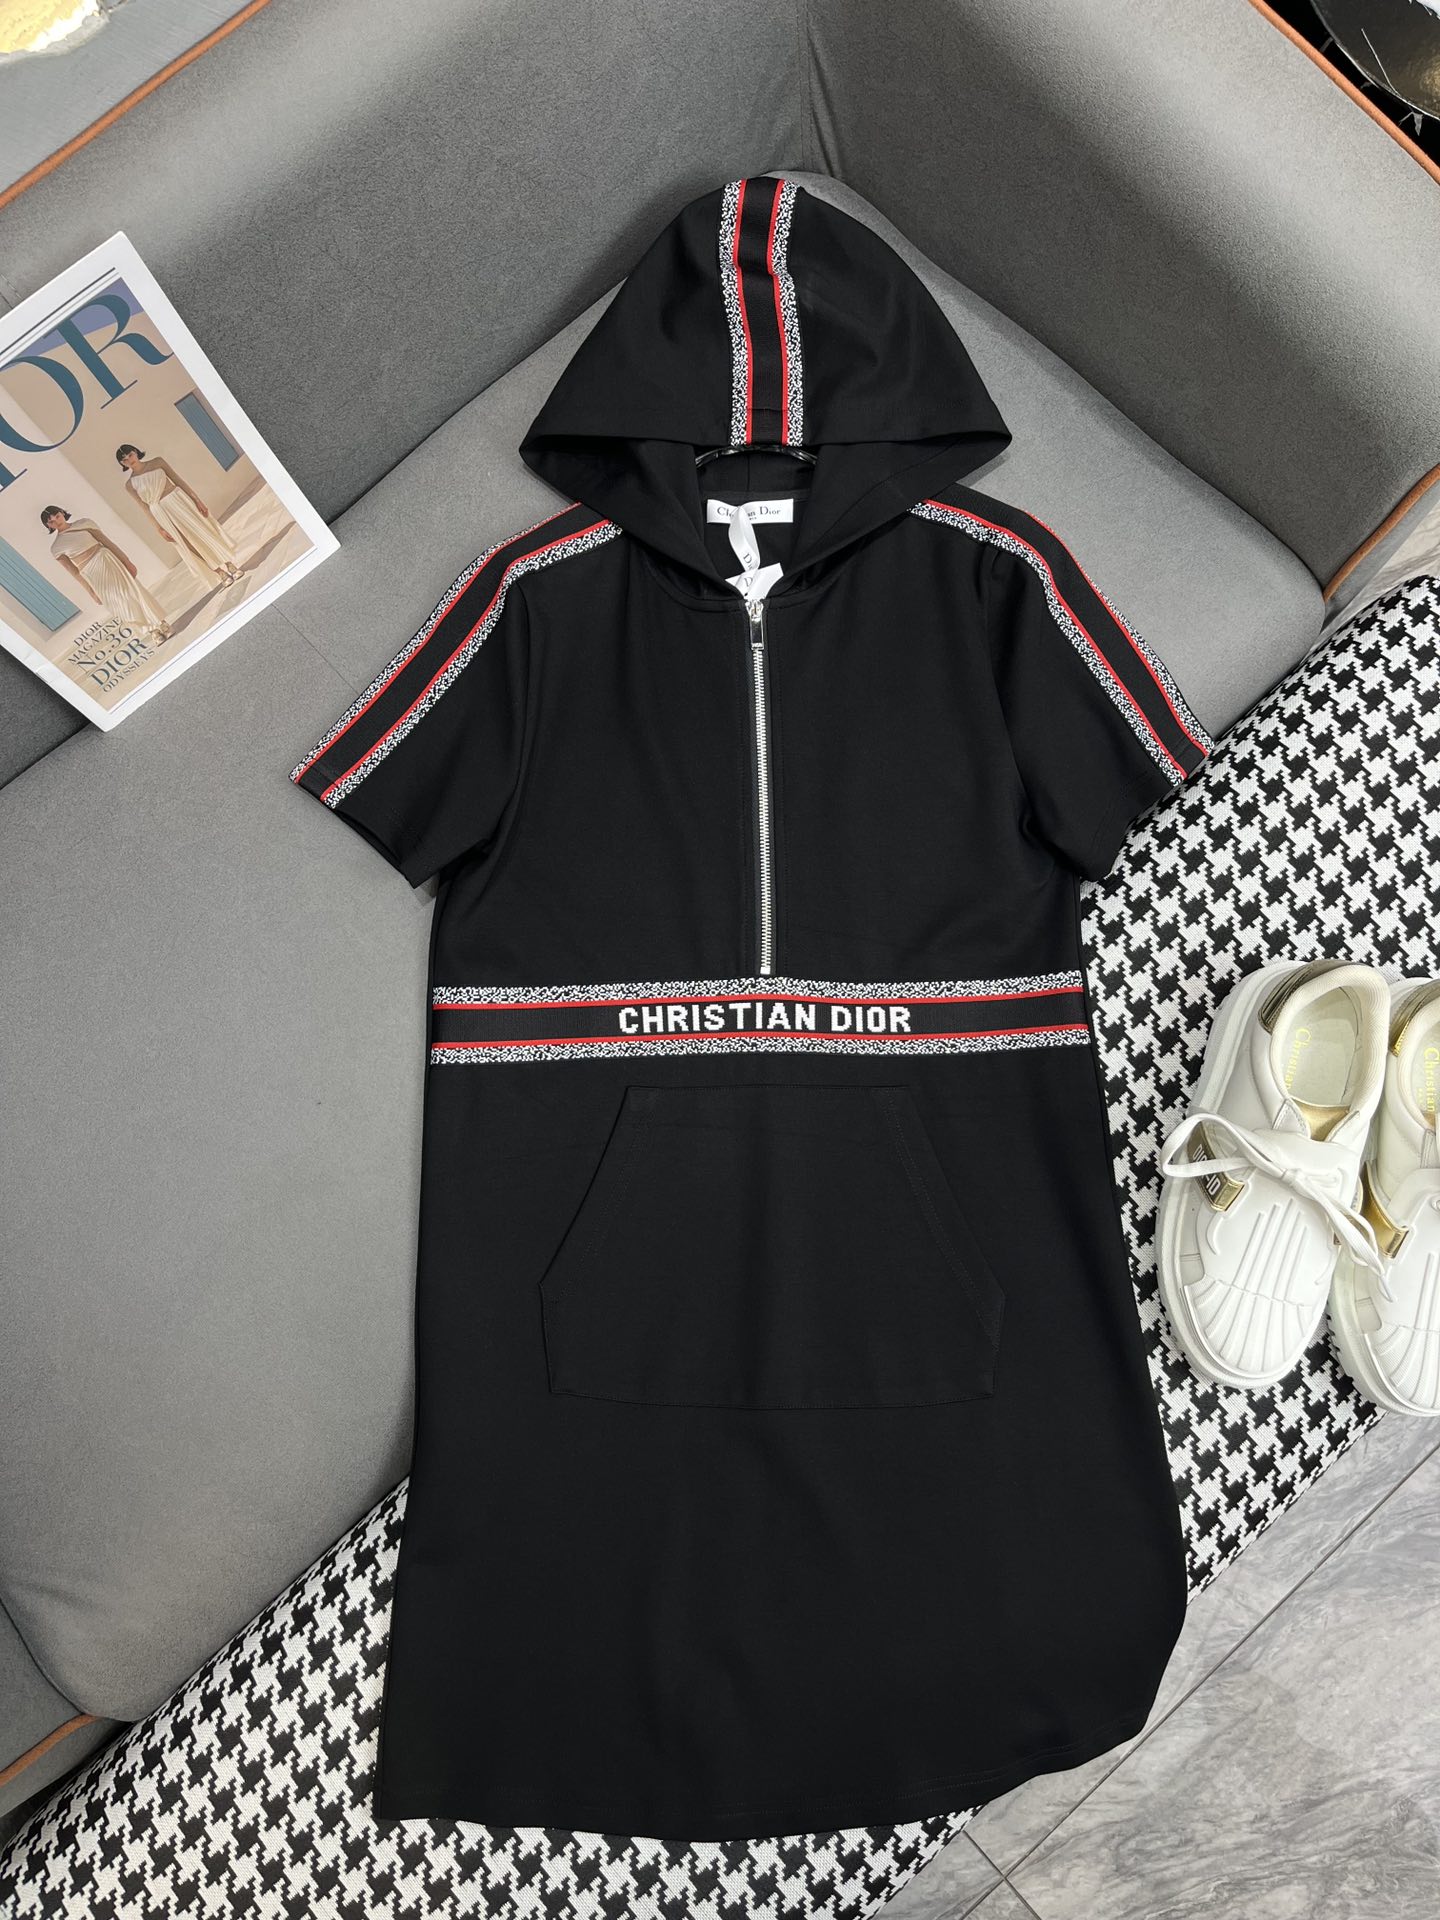 Dior Clothing Dresses Splicing Spring/Summer Collection Hooded Top